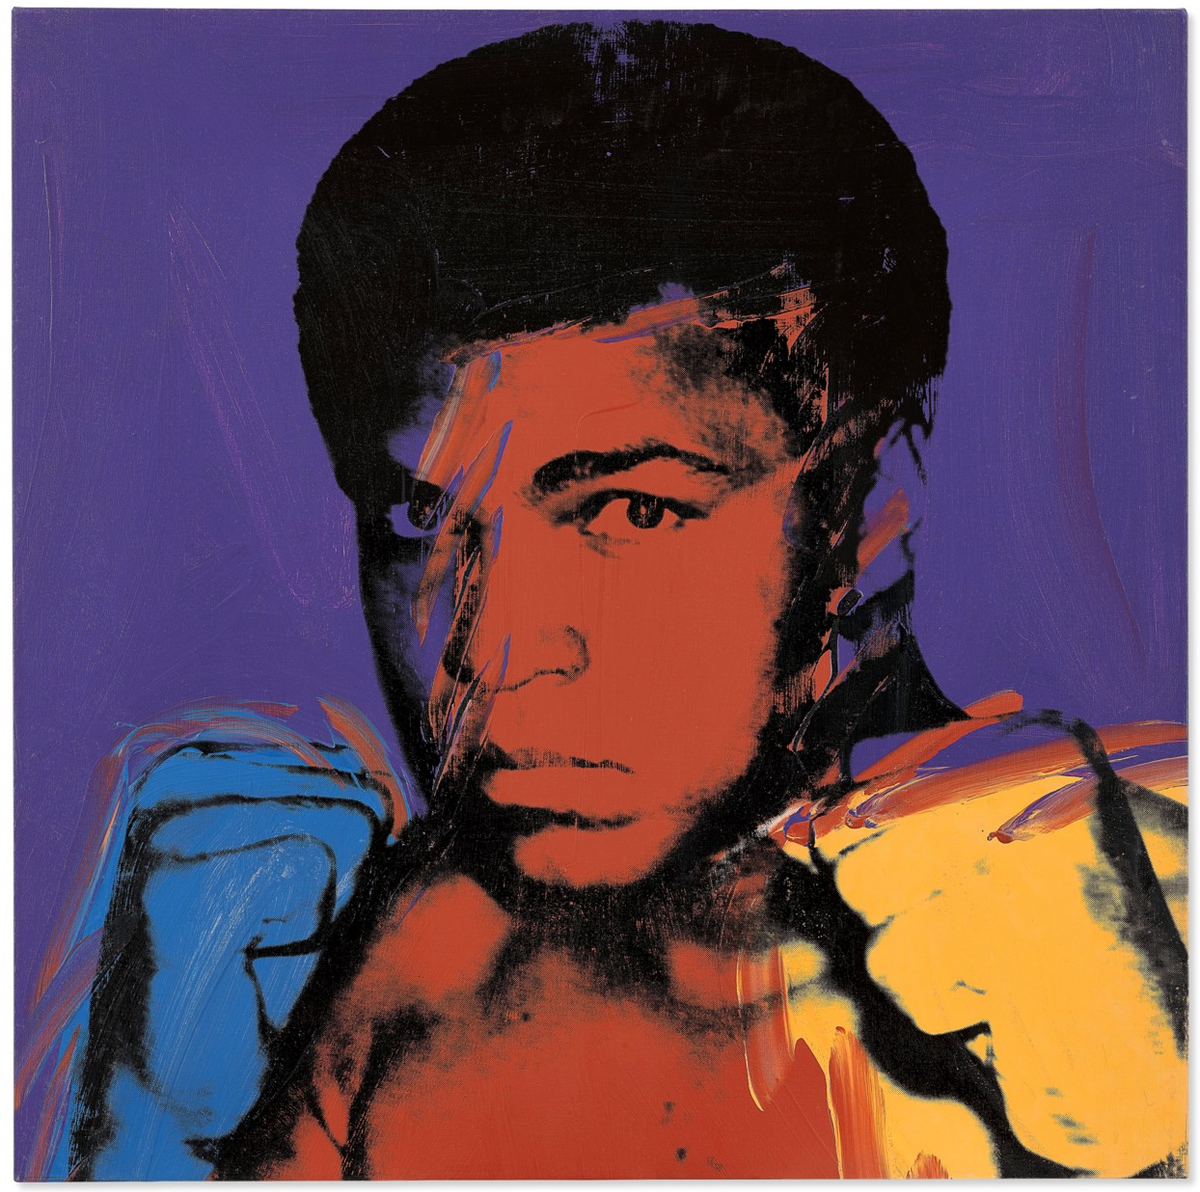 Andy Warhol, Muhammad Ali (1977) sold for $18.1m © Christie's Images Ltd. 2021